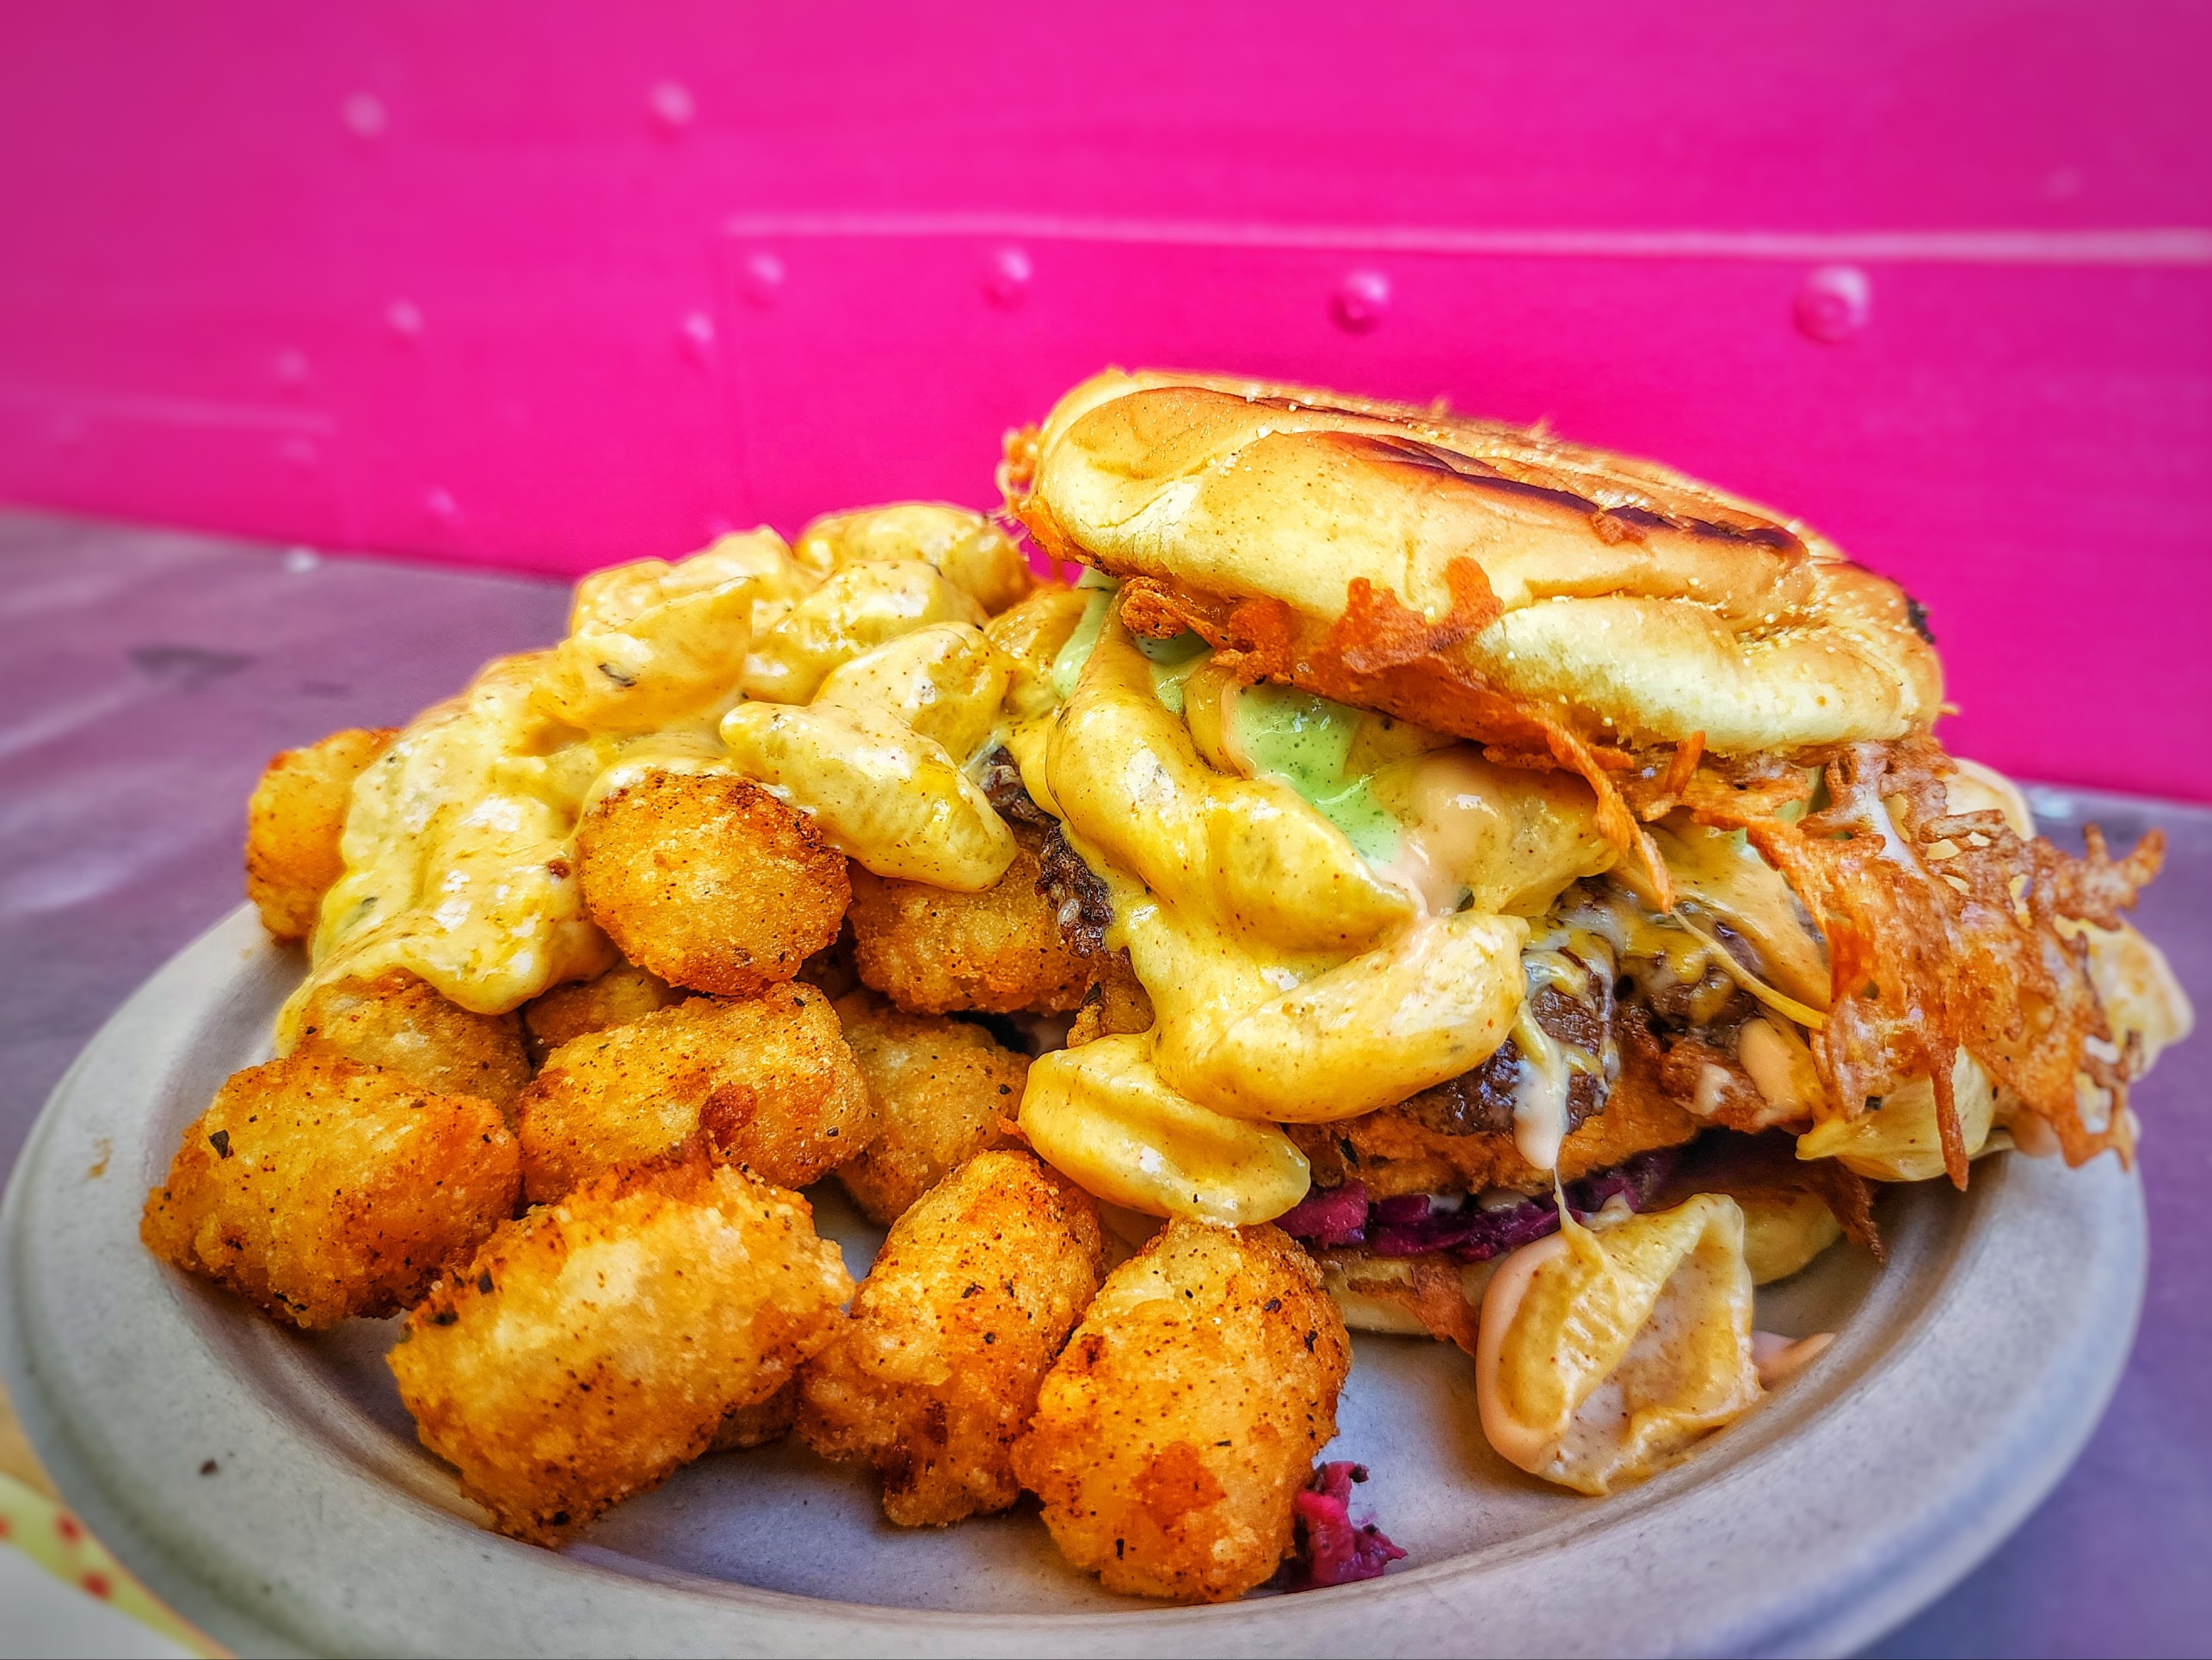 A burger topped with mac and cheese and fried chicken comes with a pile of tots at Nacheaux.